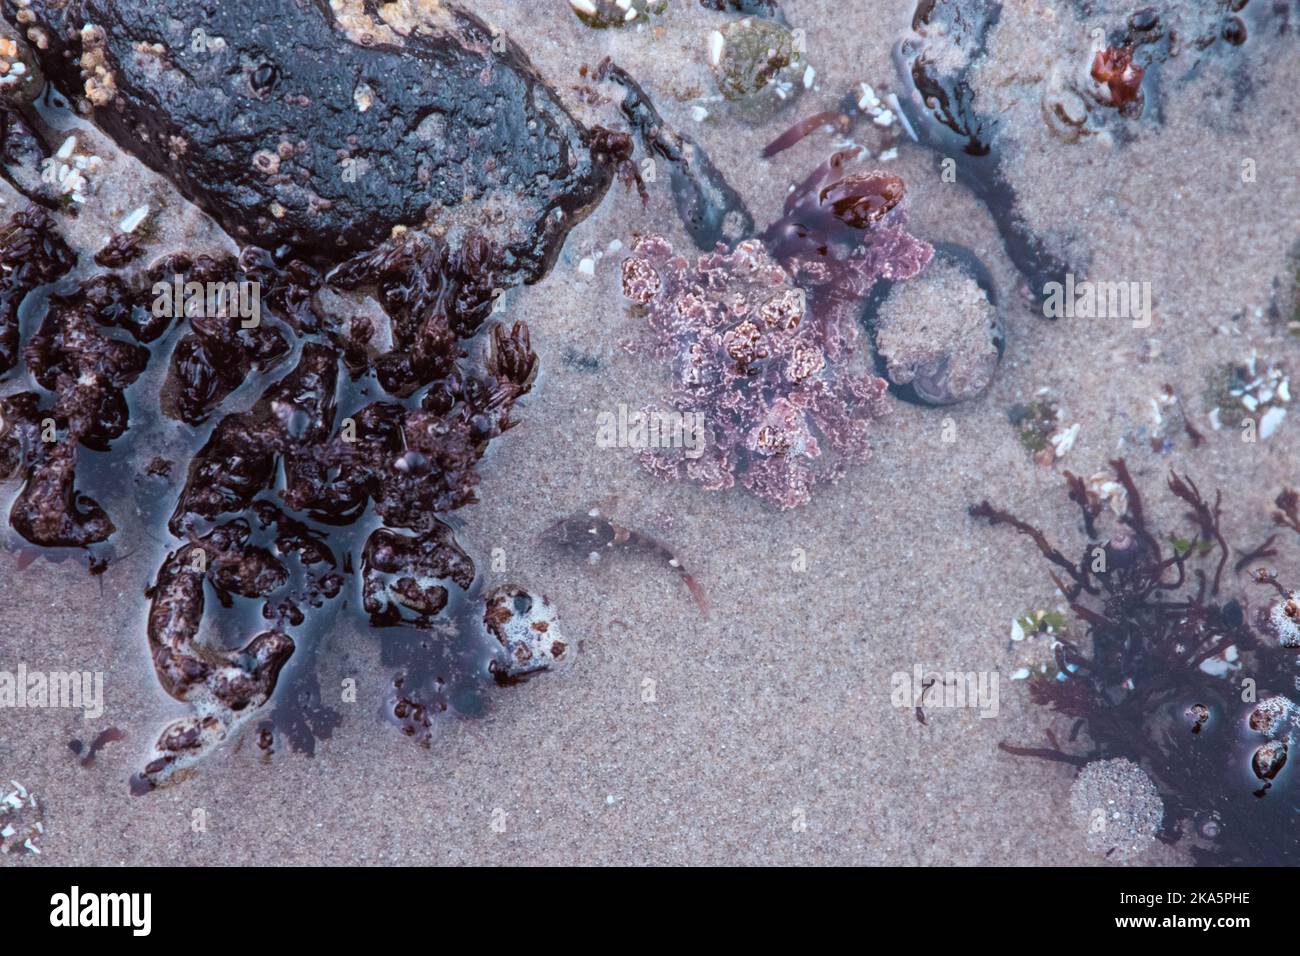 Star fish clinging to the barnacle covered sea stacks, on the Oregon Coastline. Stock Photo